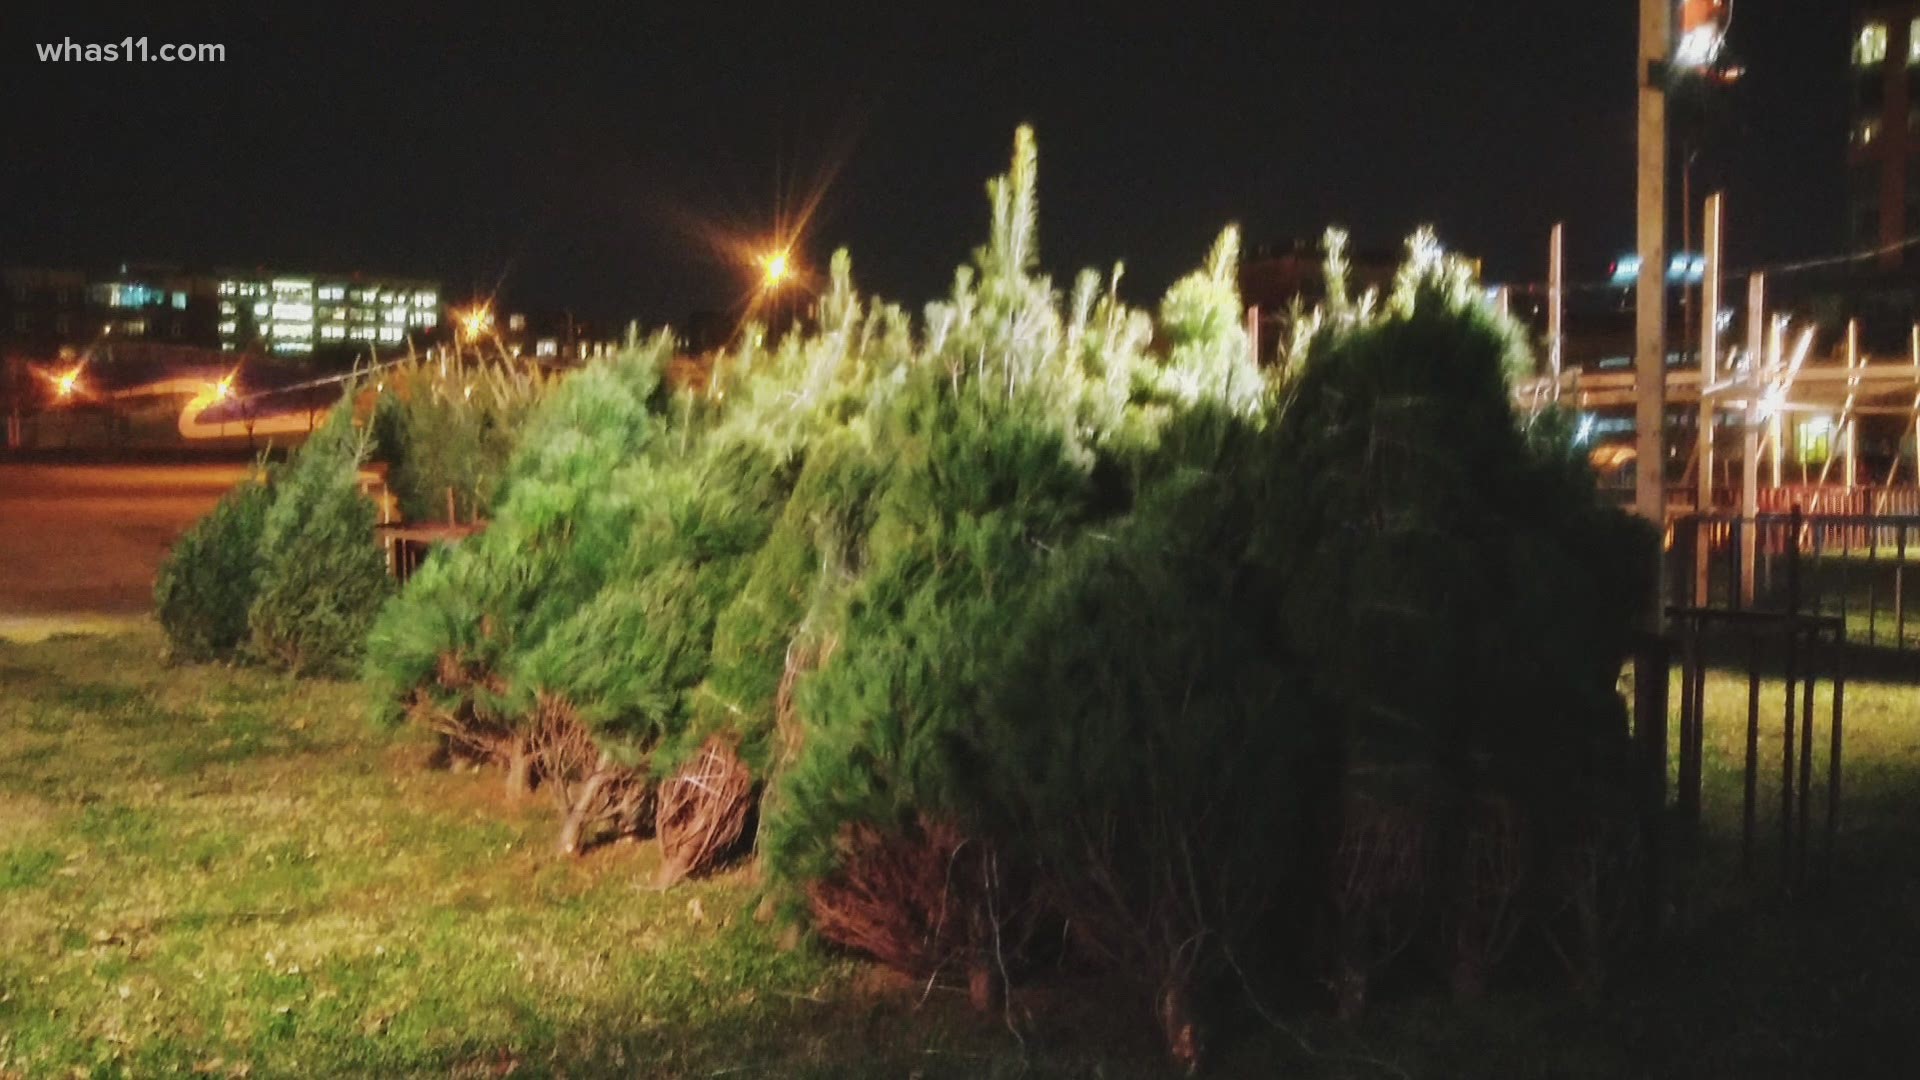 Book's Christmas Trees has started selling trees this holiday season.